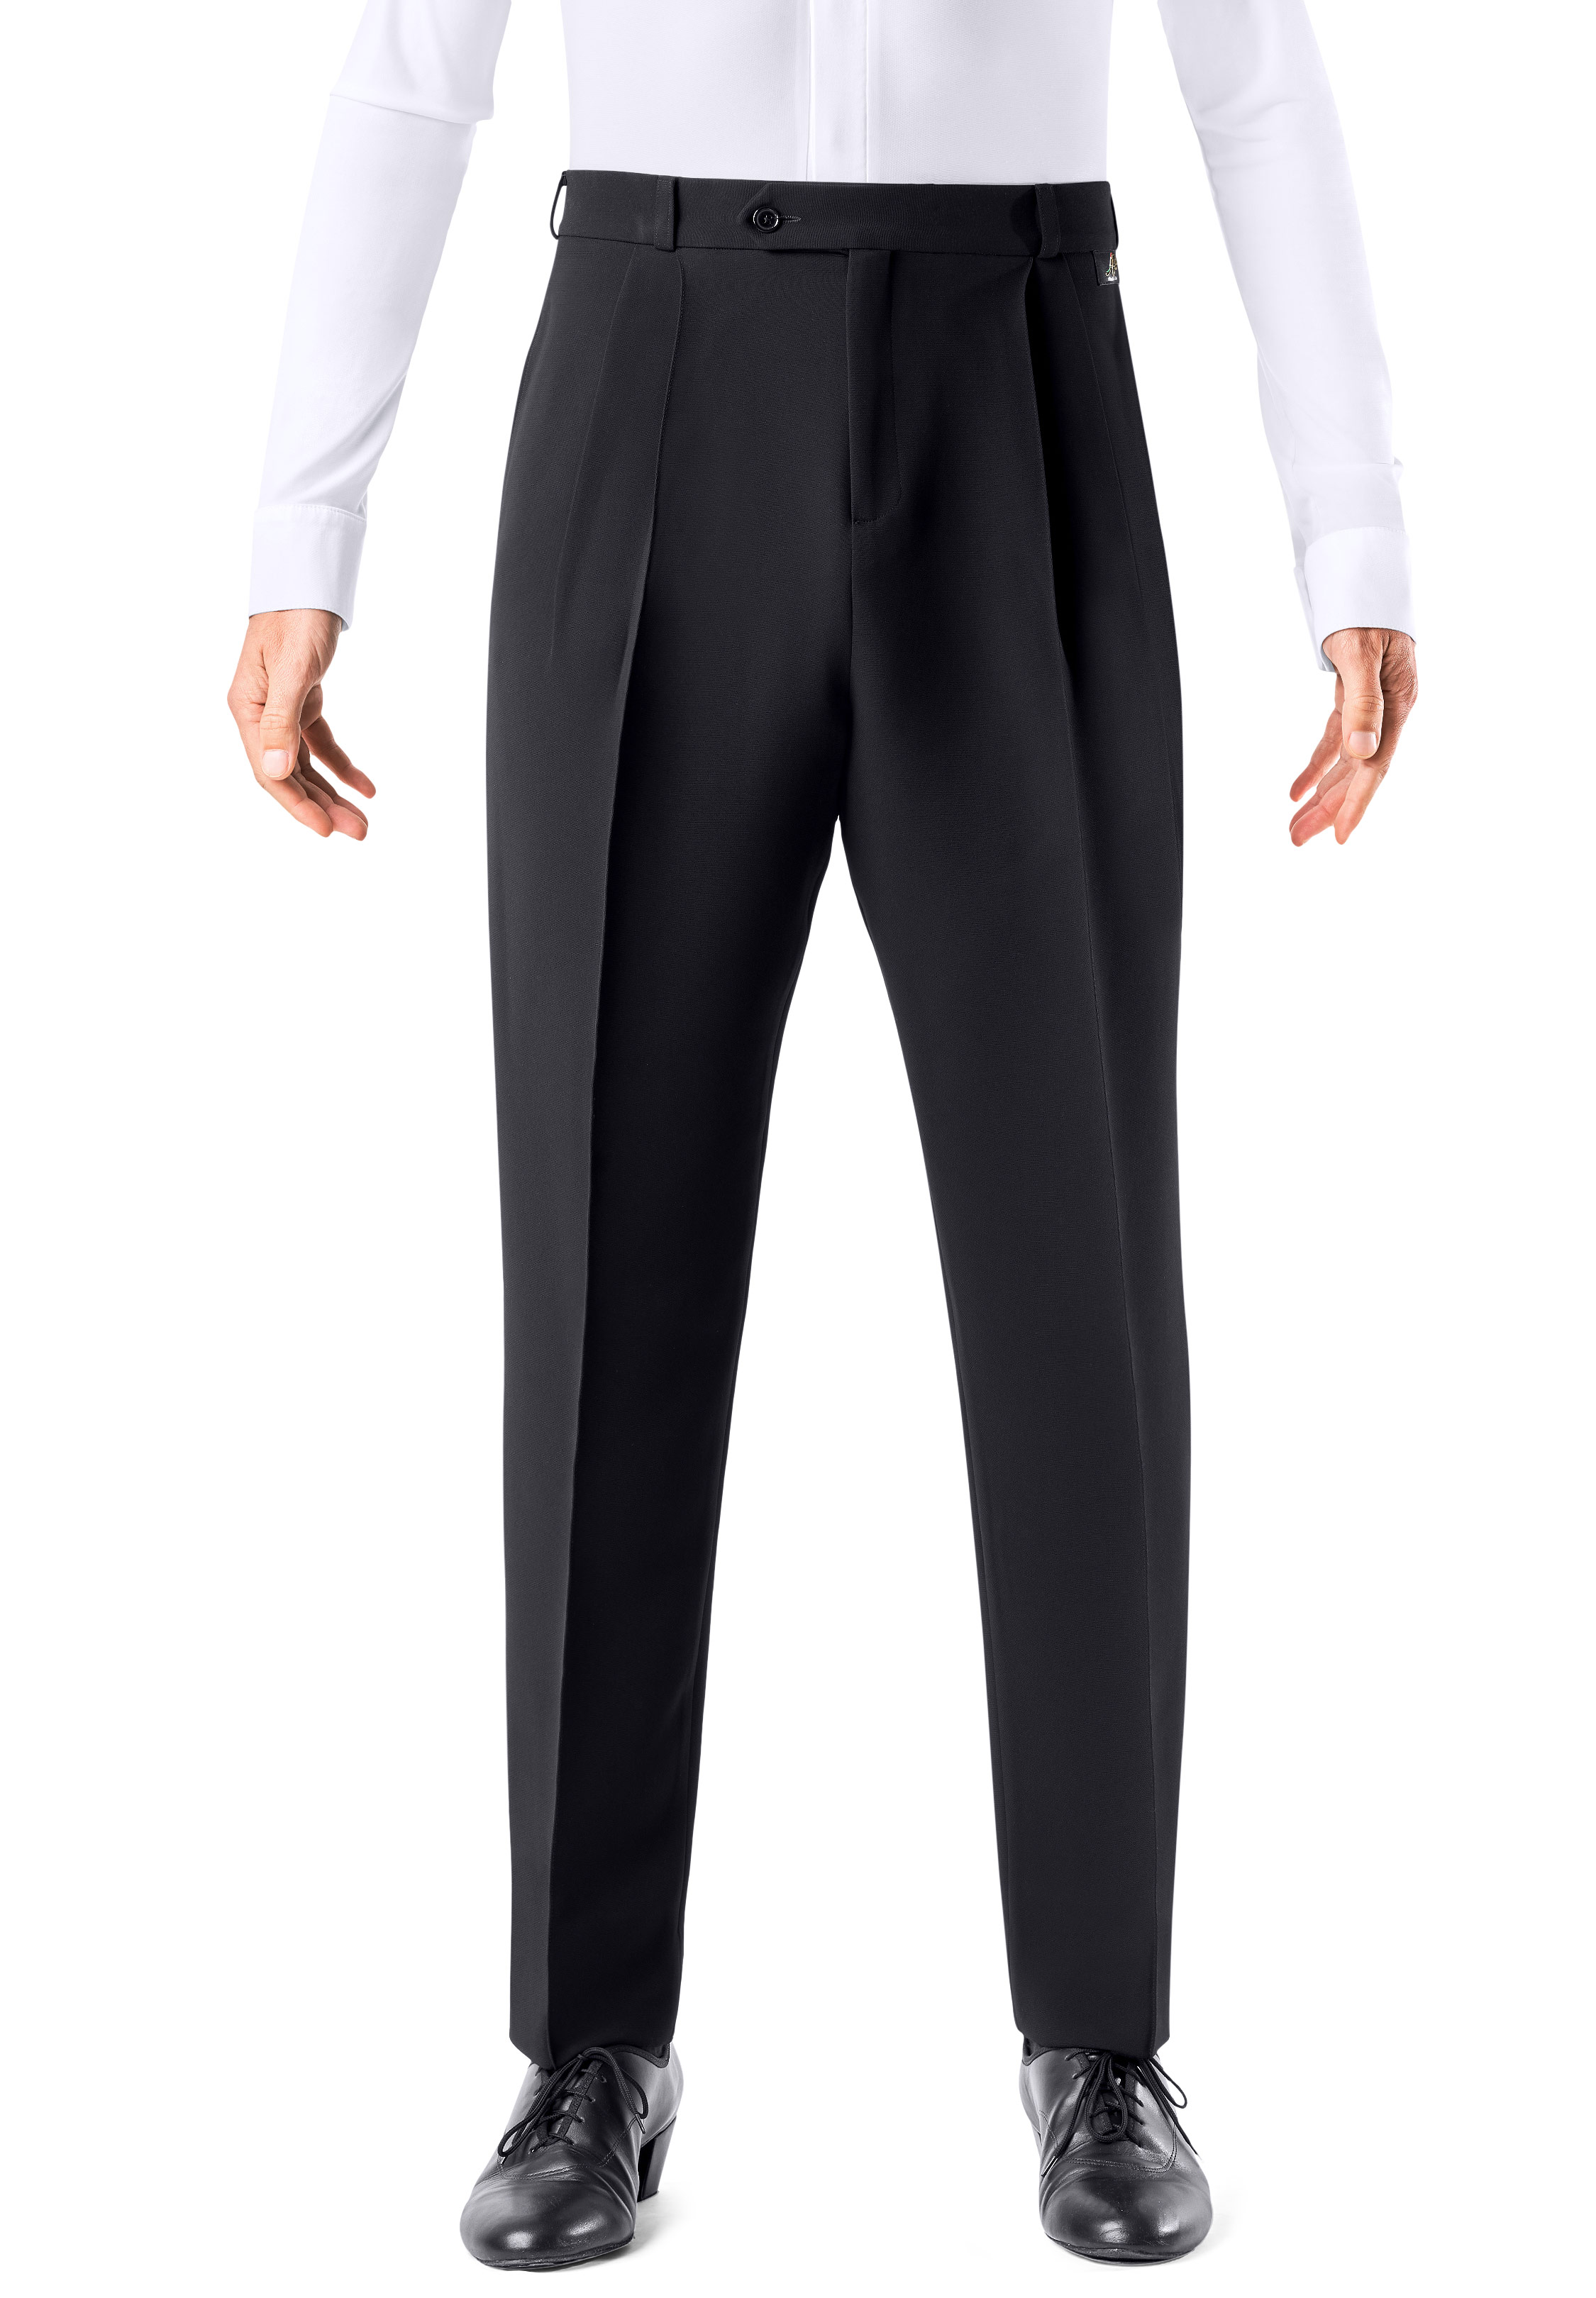 Stella McCartney Double Pleated Pants with Belt Loops women - Glamood Outlet